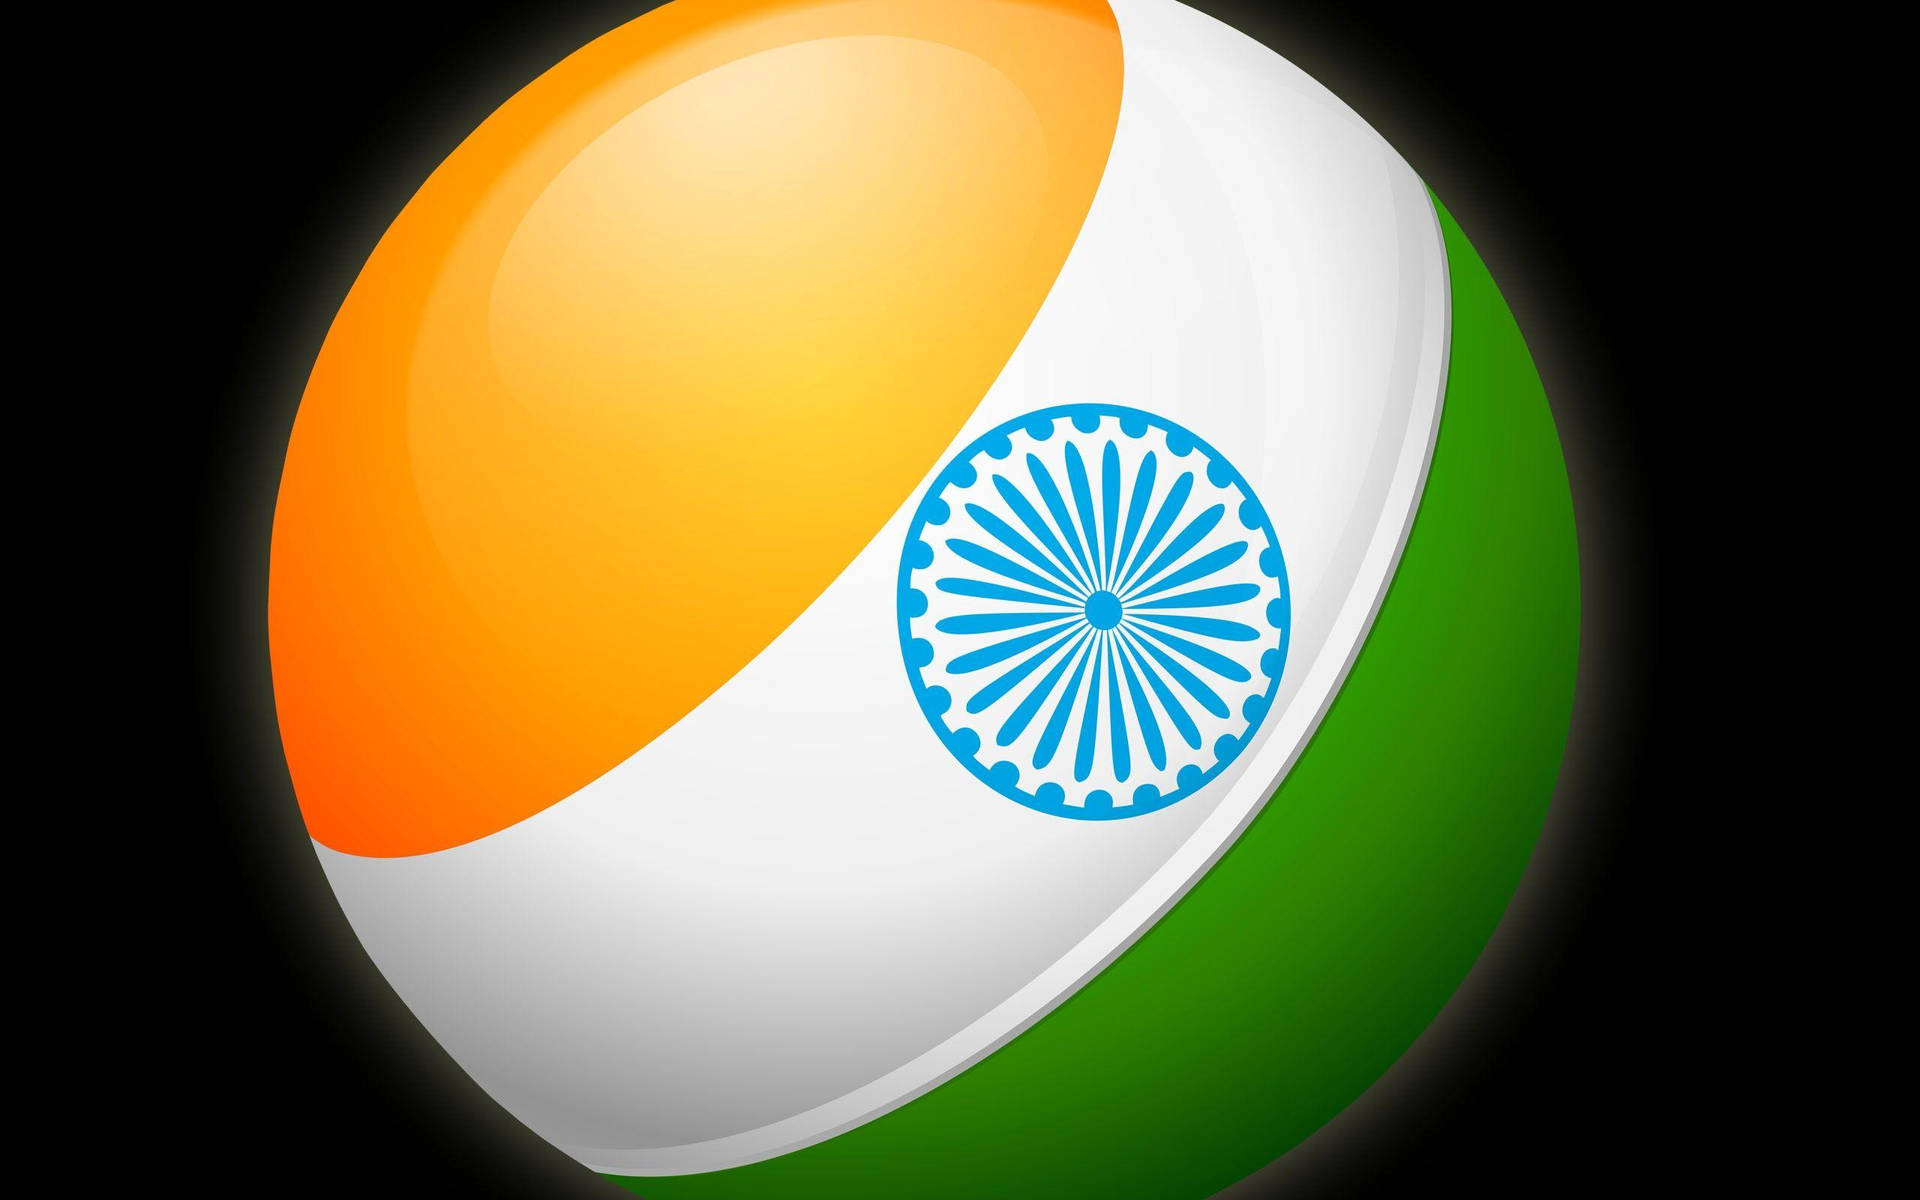 570 Indian Flag Hd Stock Video Footage  4K and HD Video Clips   Shutterstock